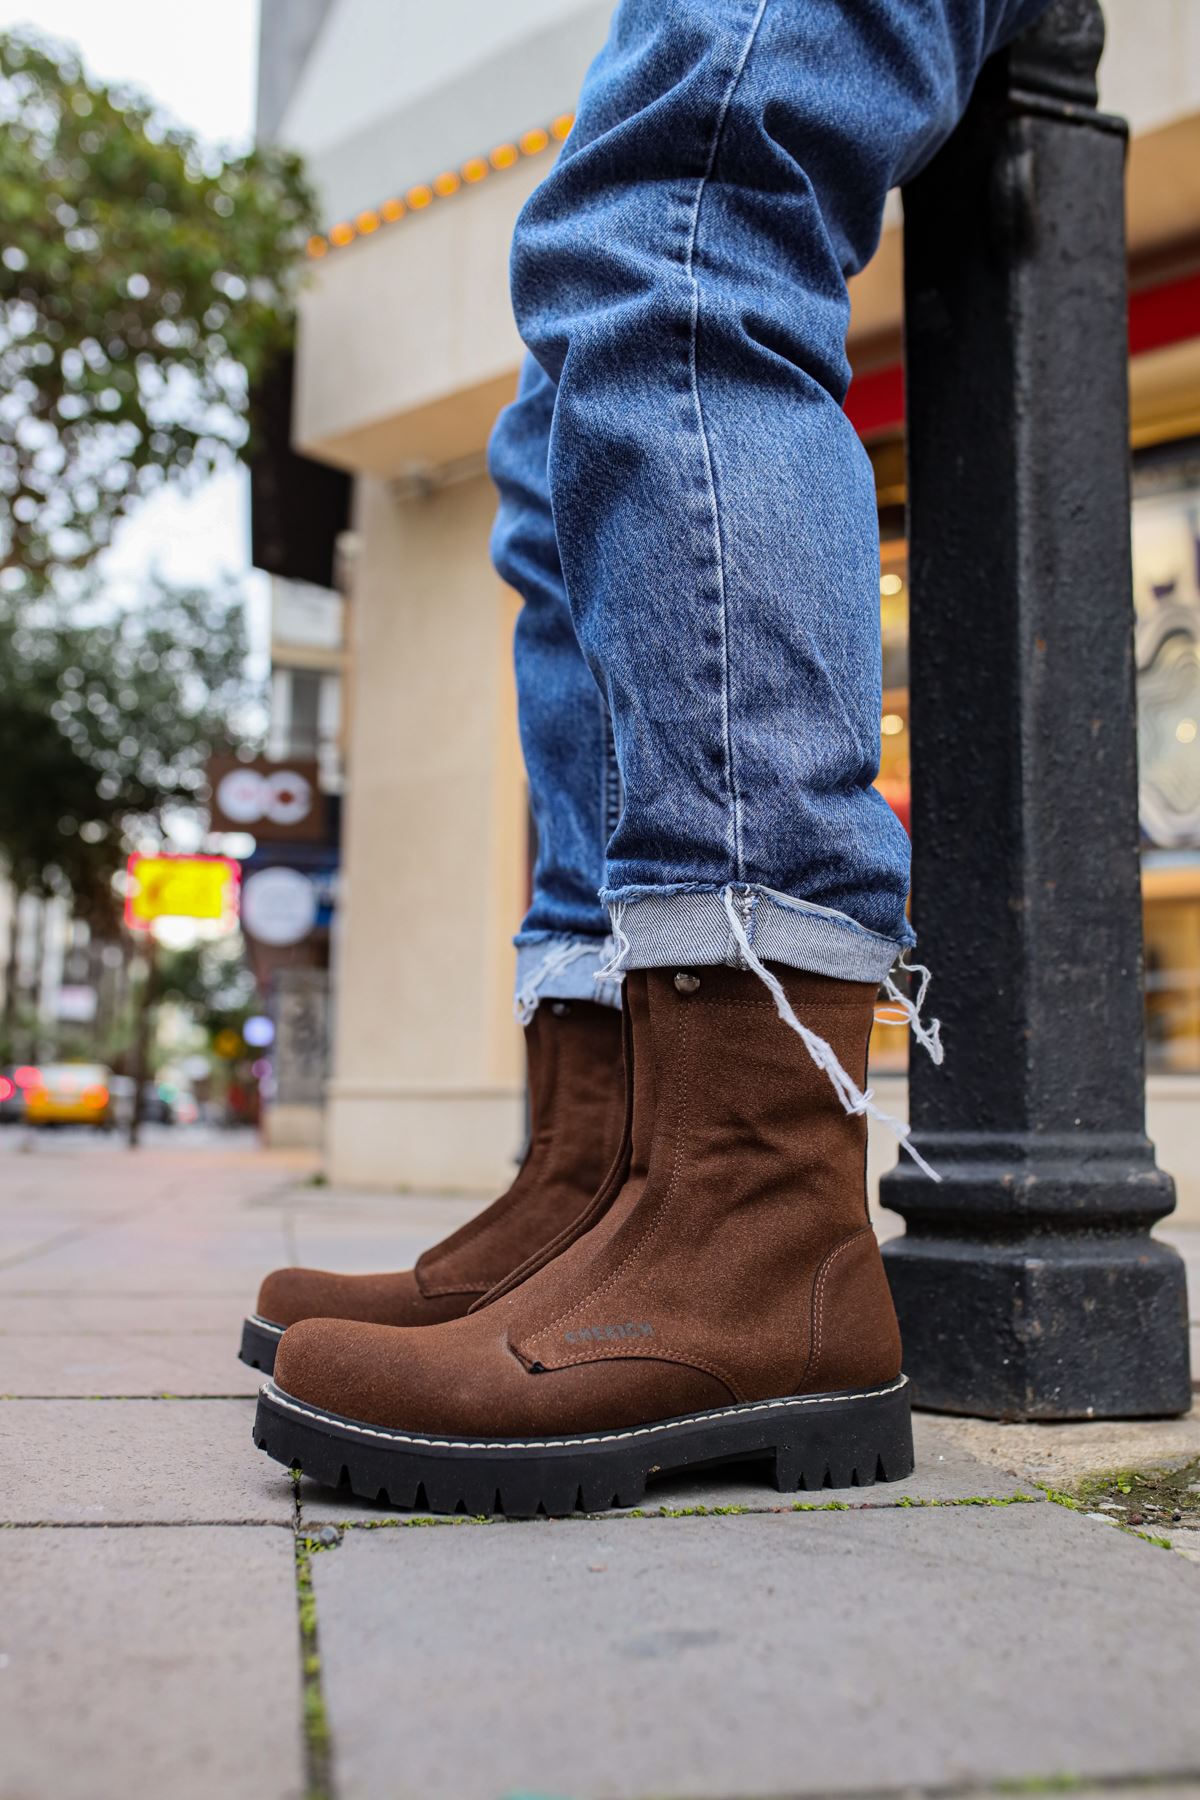 CH027 Men's Suede Brown-Black Sole Casual Winter Boots - STREETMODE ™